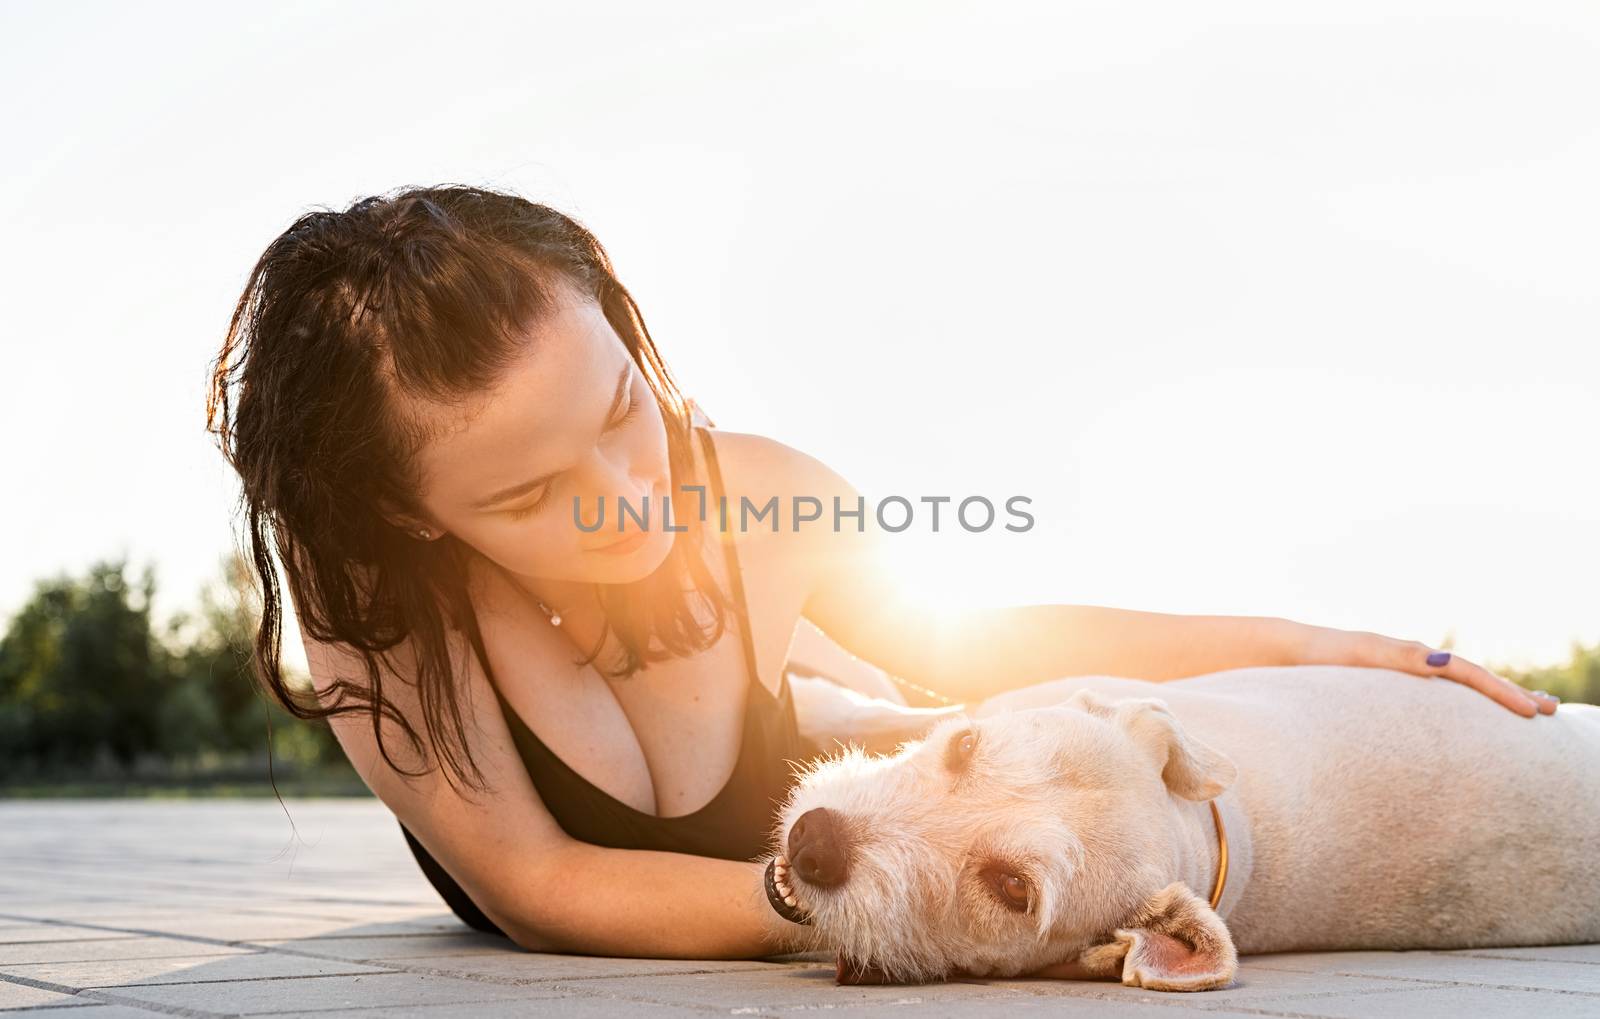 Pet care. Pet adoption. Young woman hugging her mixed breed dog